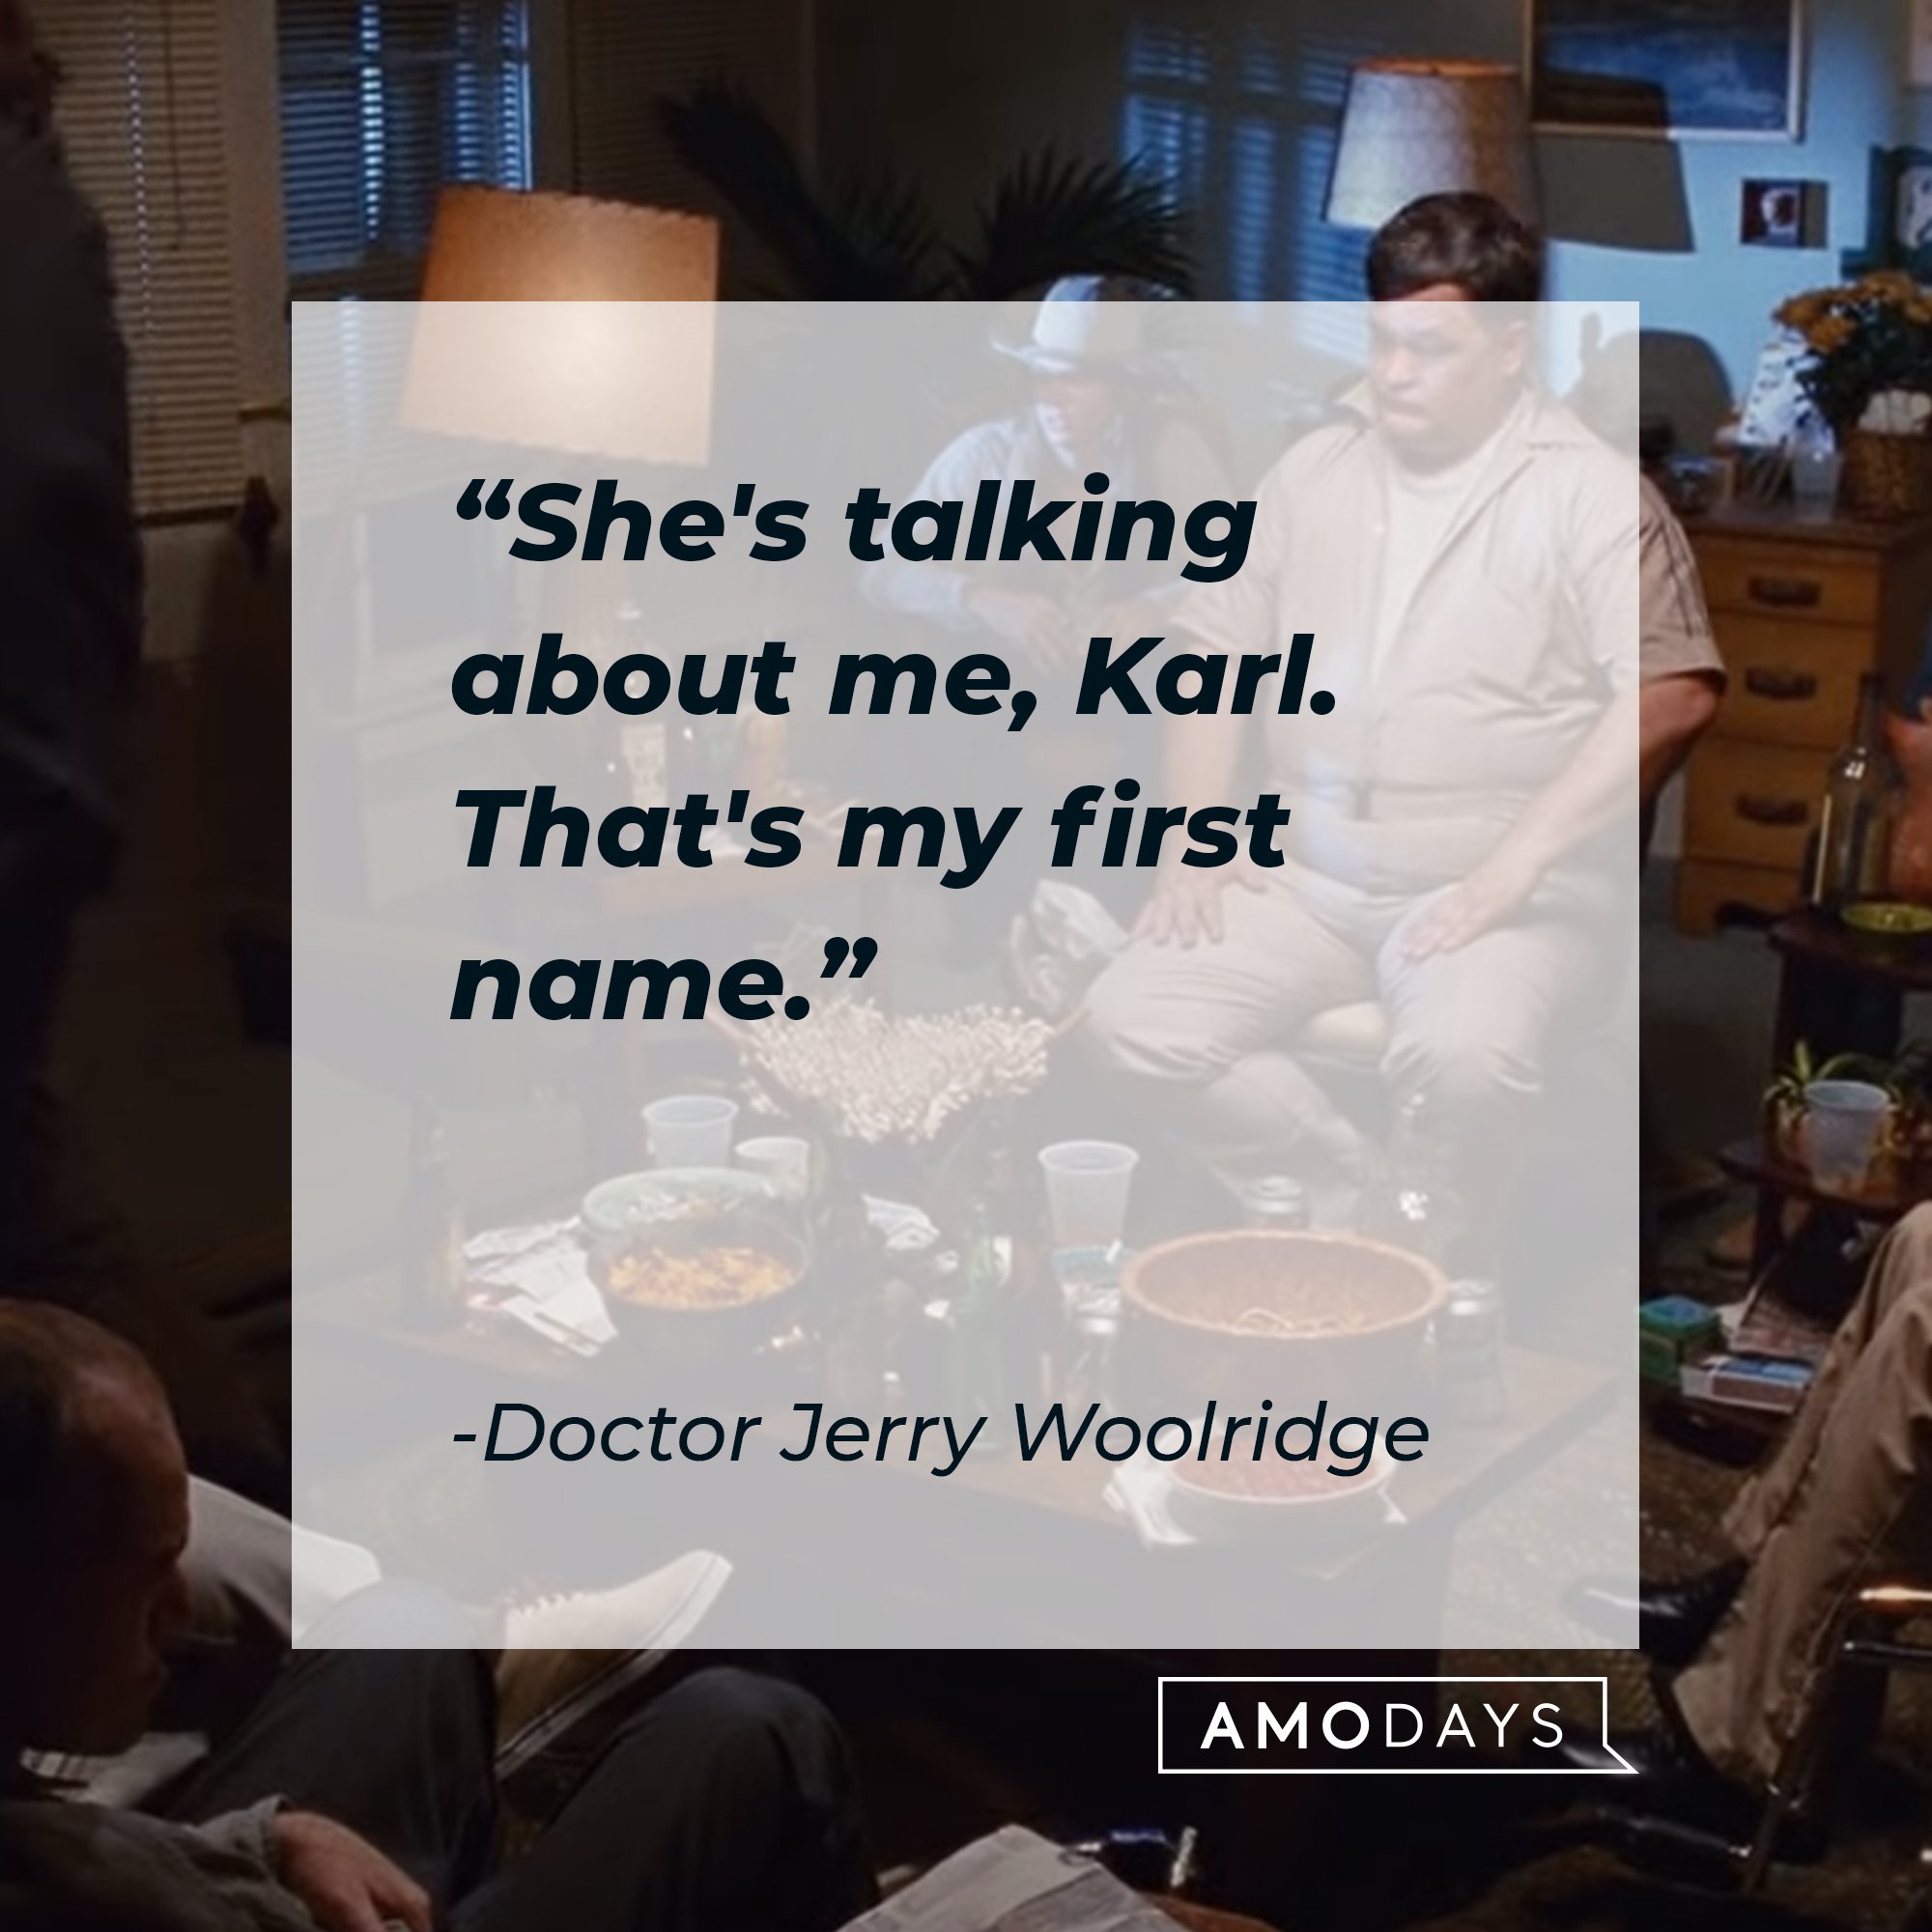 Doctor Jerry Woolridge’s quote: "She's talking about me, Karl. That's my first name." | Image: AmoDays